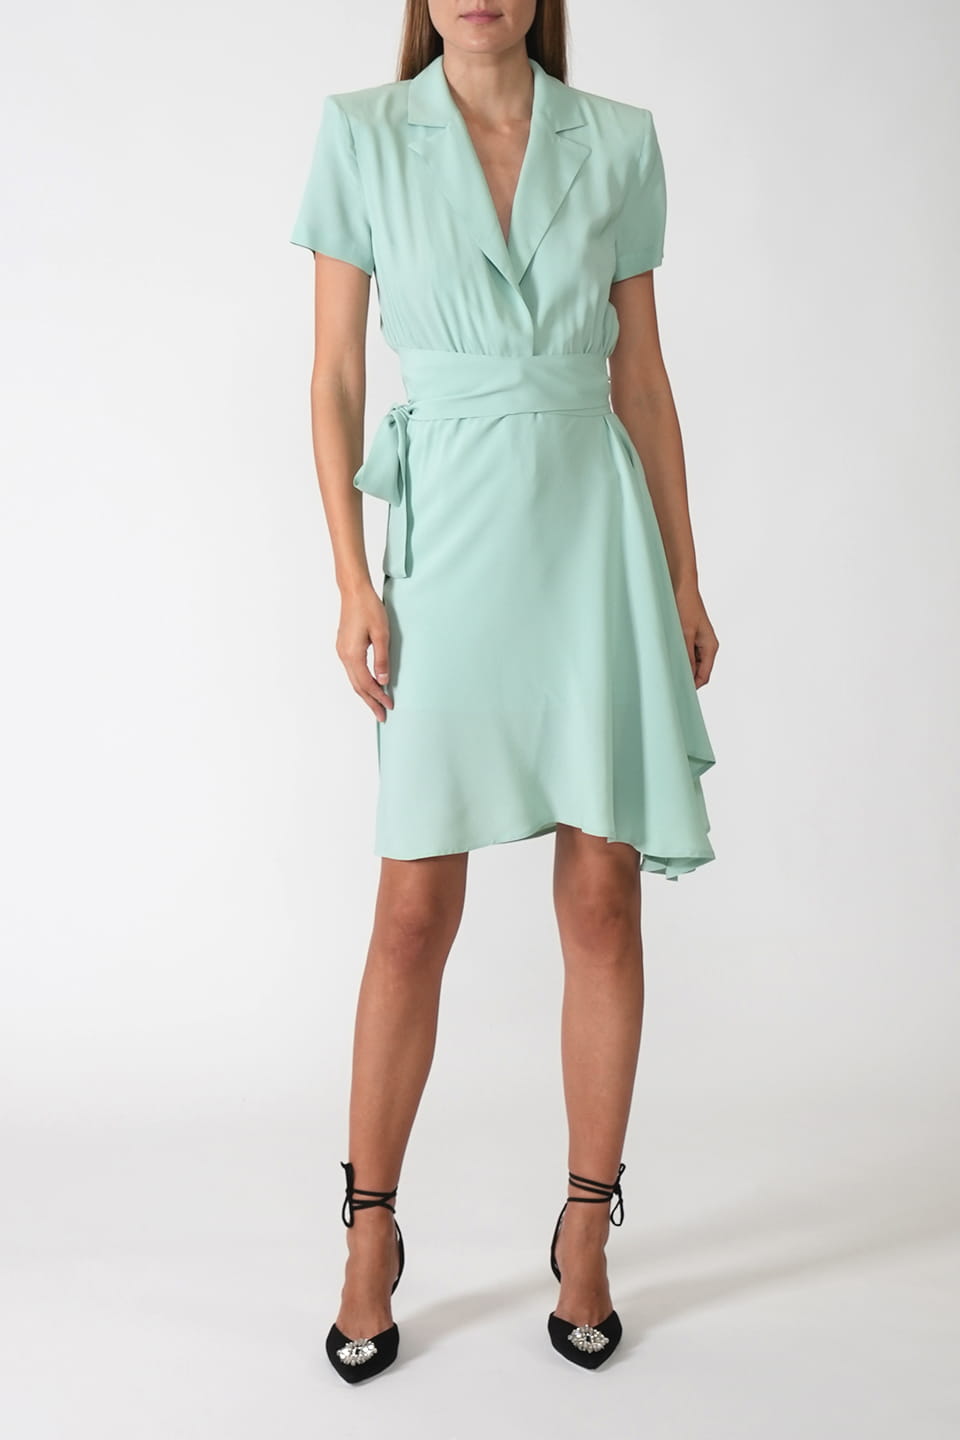 Shop online trendy Green Midi dresses from Federica Tosi Fashion designer. Product gallery 1